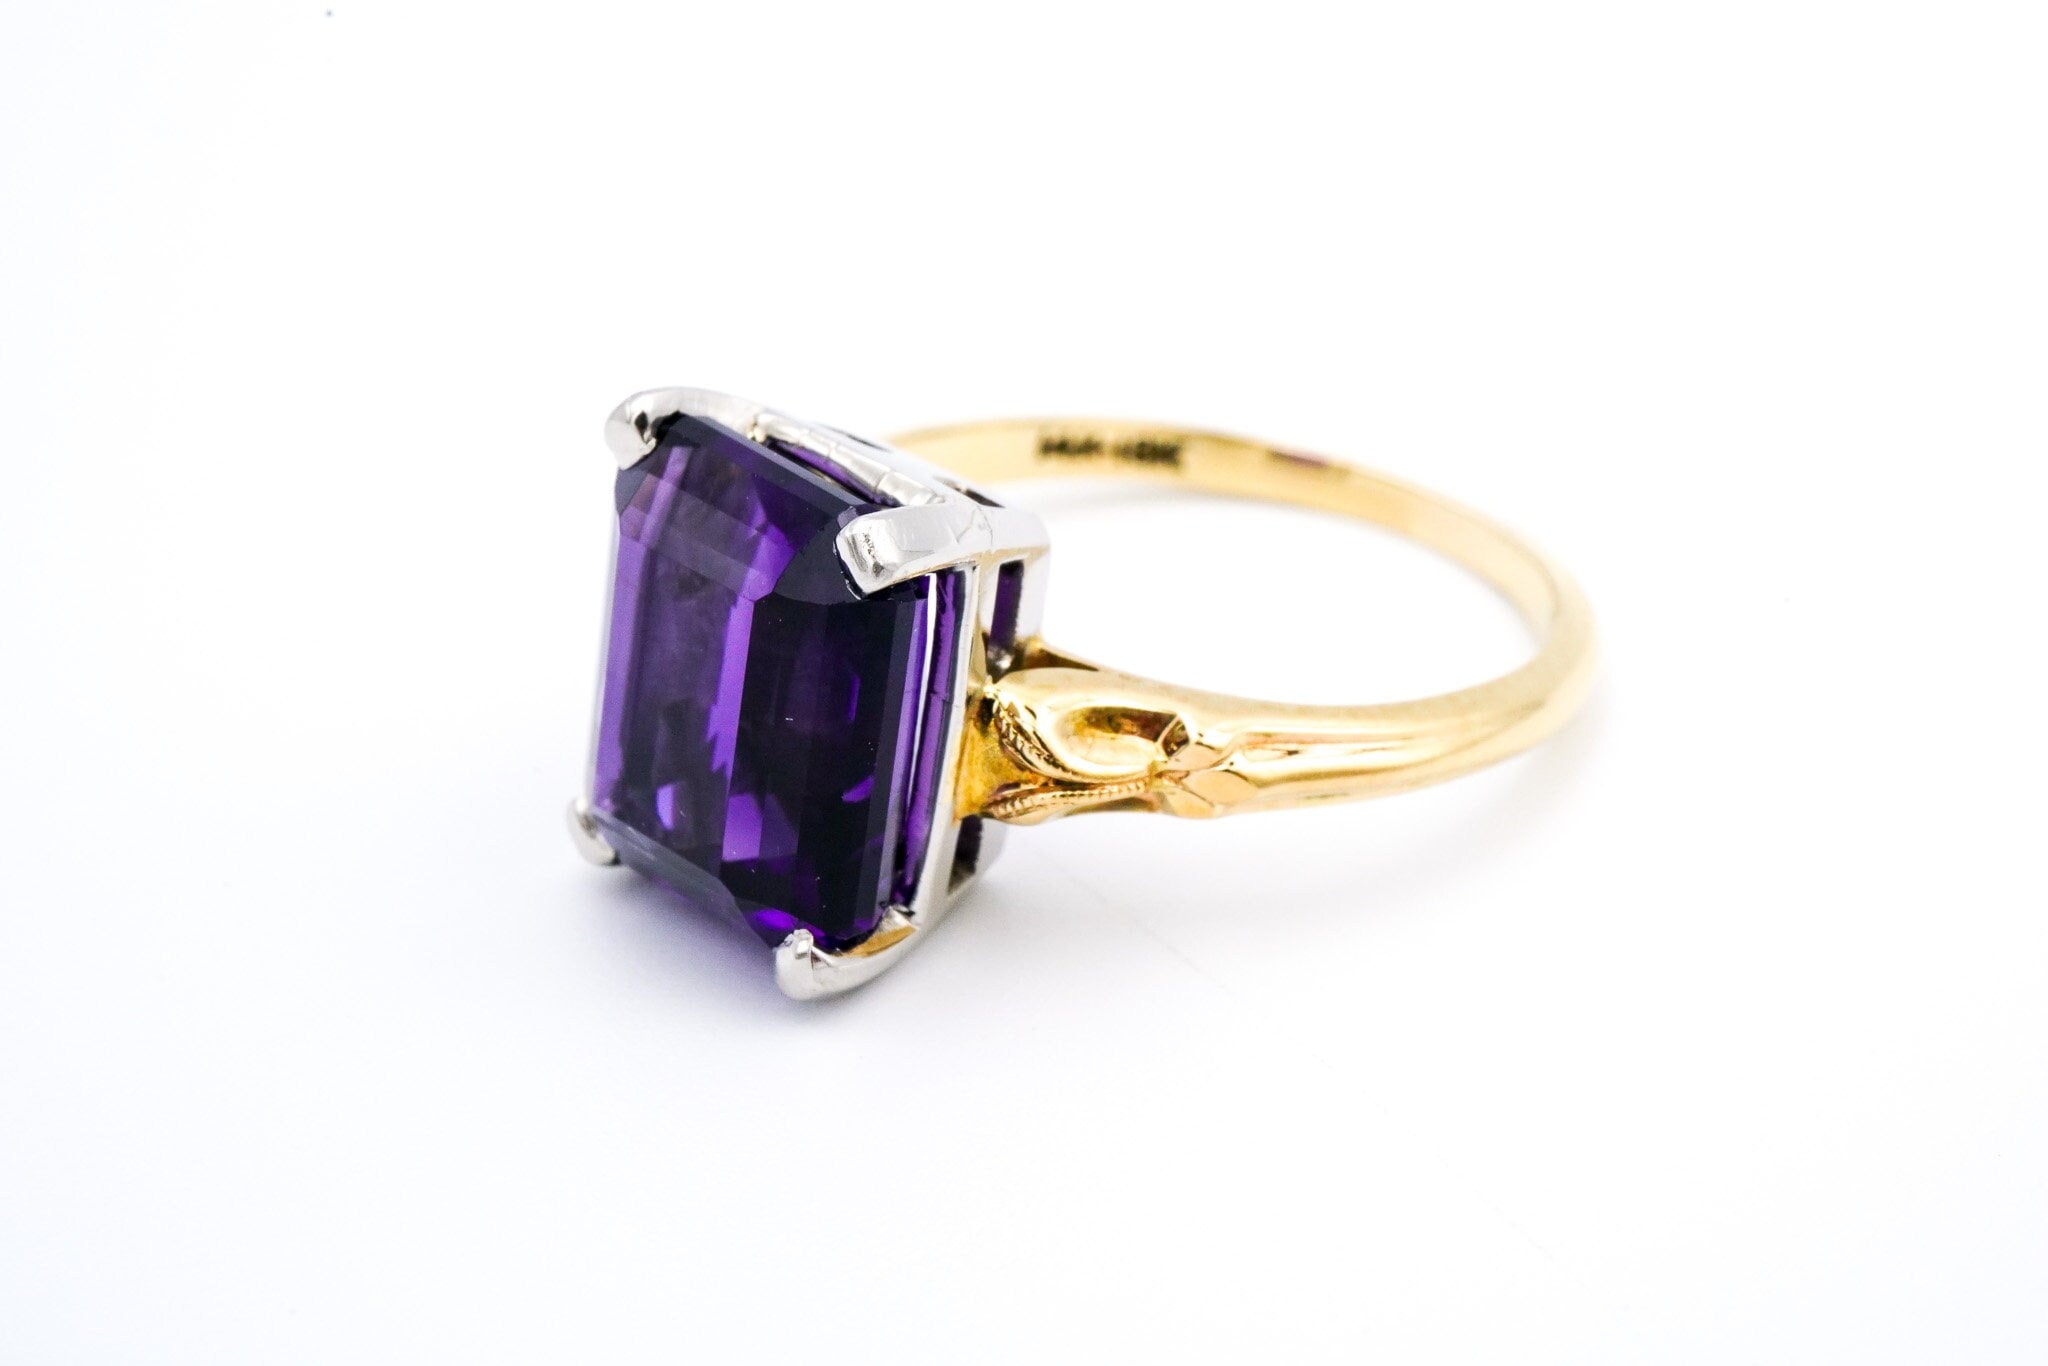 18K Yellow & 14K White Gold and Amethyst Cocktail Ring - Size 6 3/4